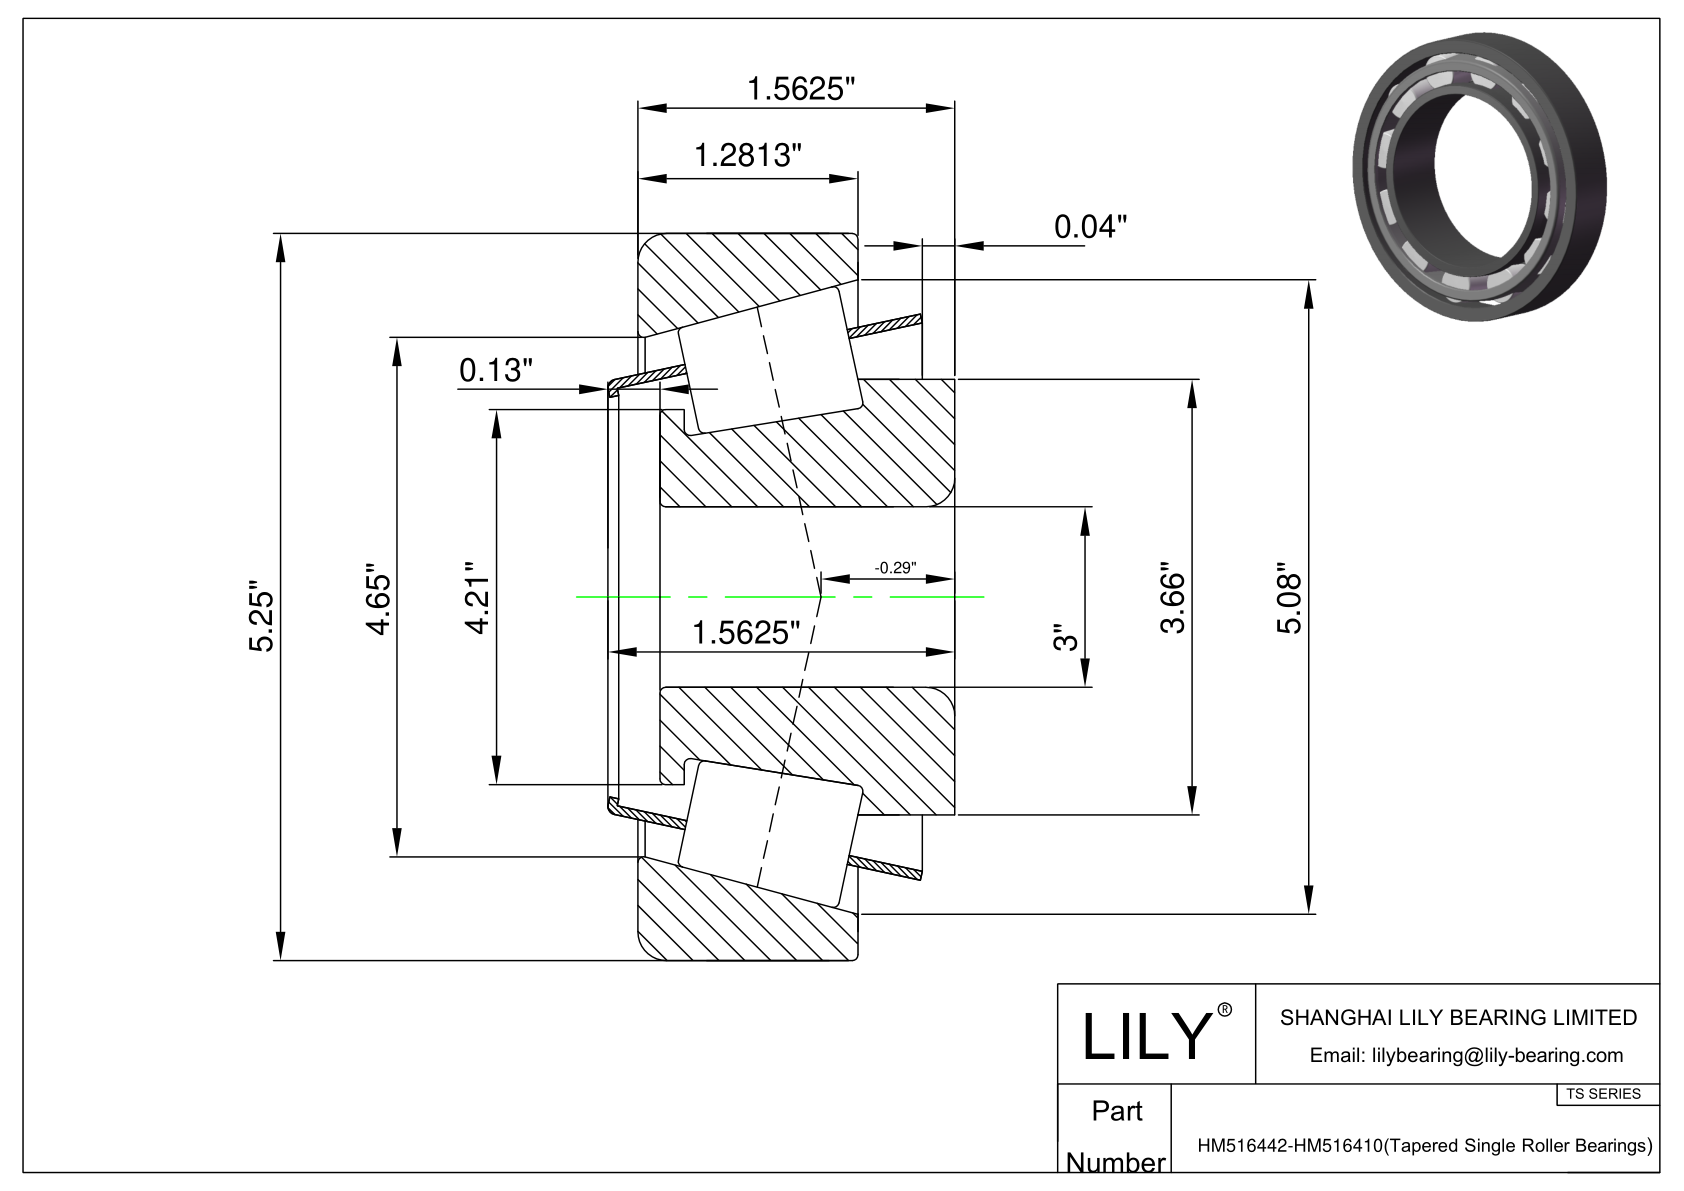 HM516442-HM516410 TS (Tapered Single Roller Bearings) (Imperial) cad drawing